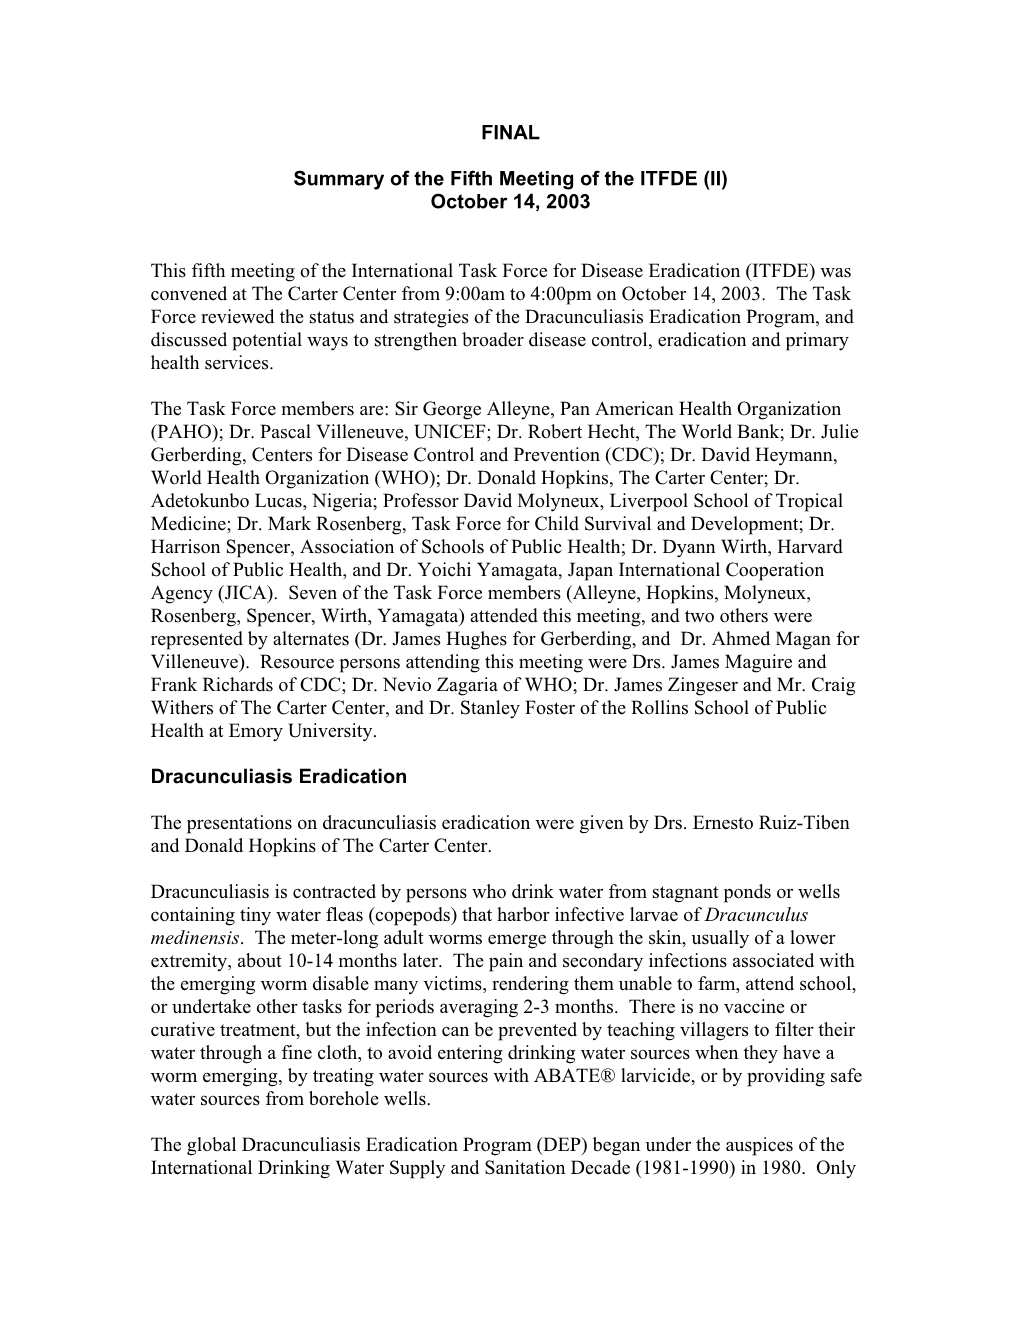 Summary of the Fifth Meeting of the ITFDE (II) October 14, 2003